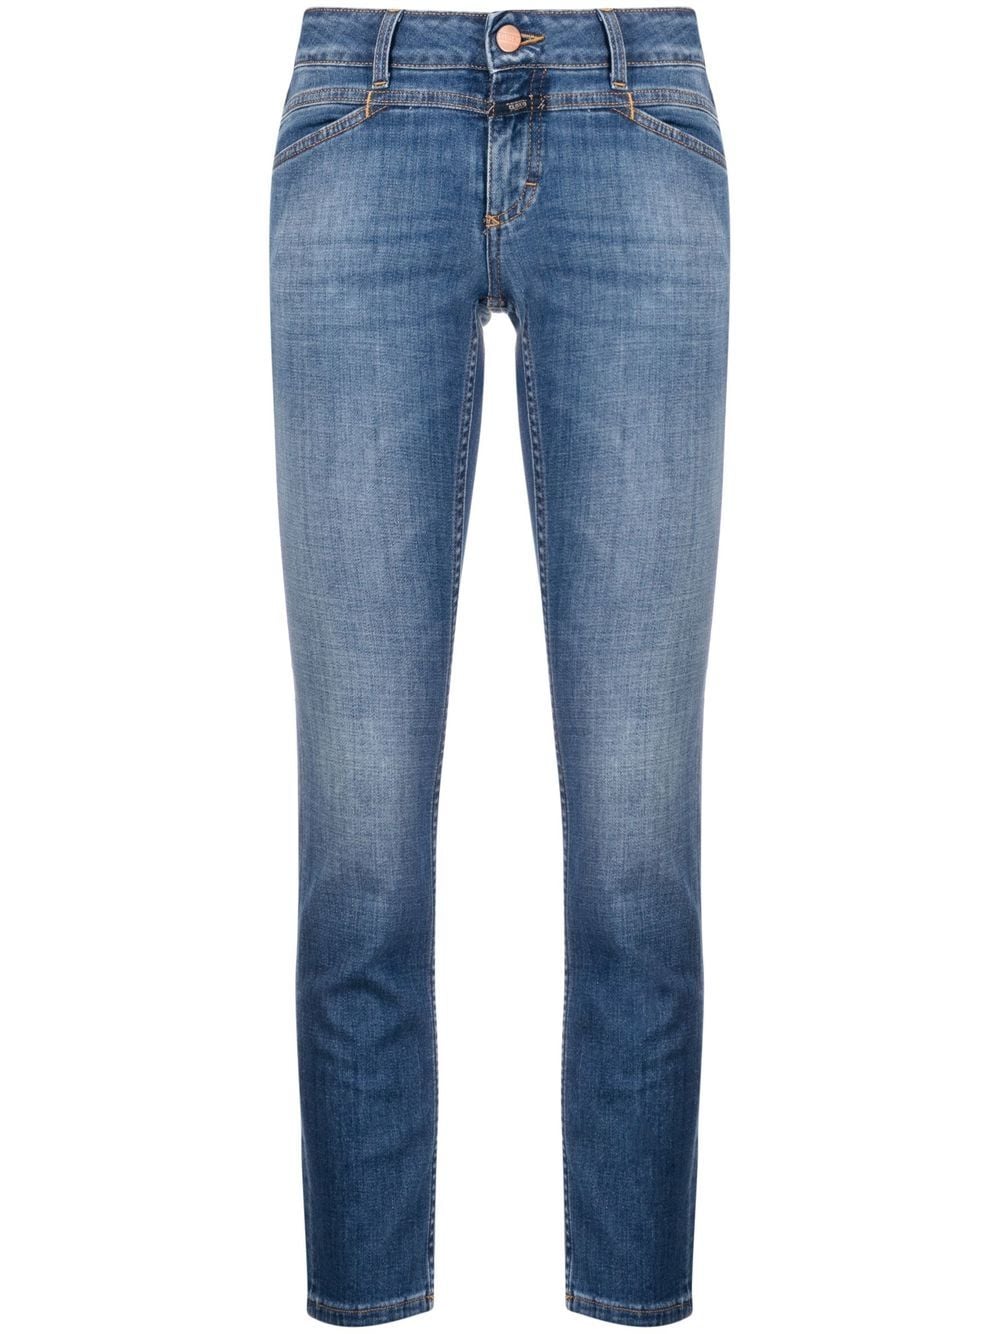 Closed A Better Blue Starlet Jeans - Farfetch